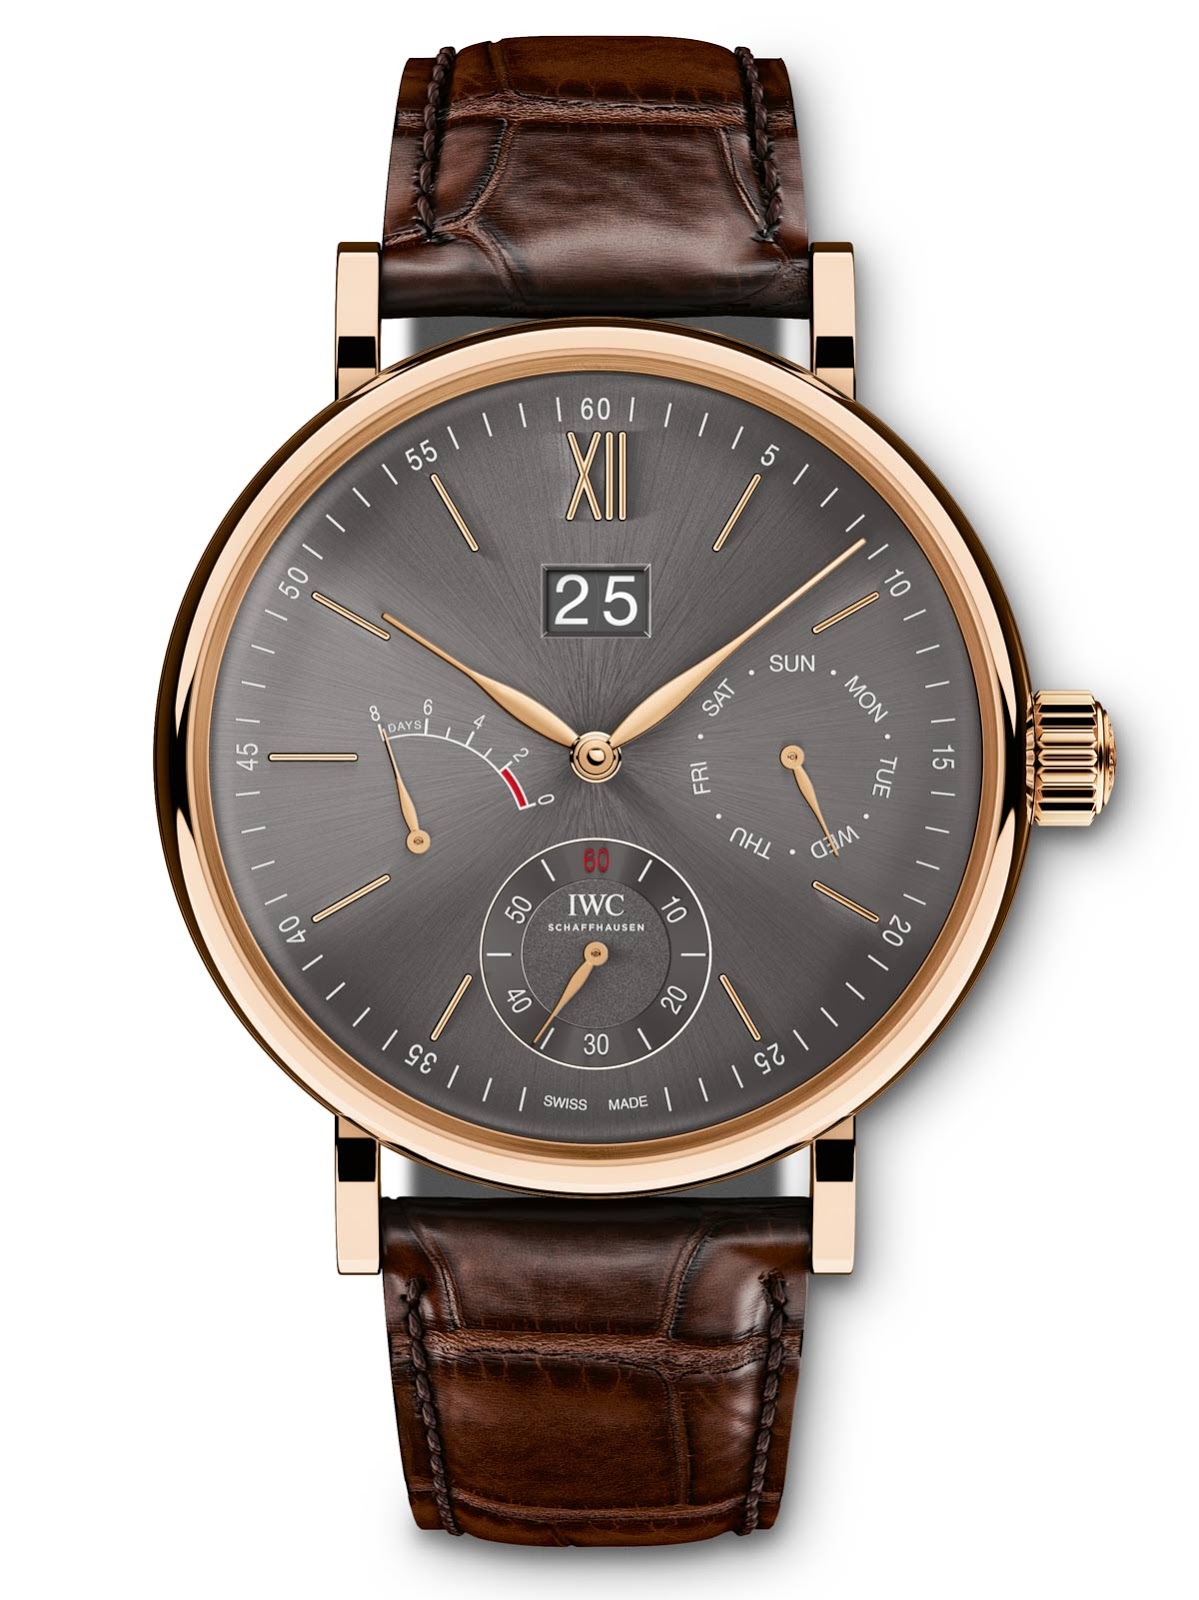 IWC - Portofino Hand-Wound Day & Date | Time and Watches | The watch blog